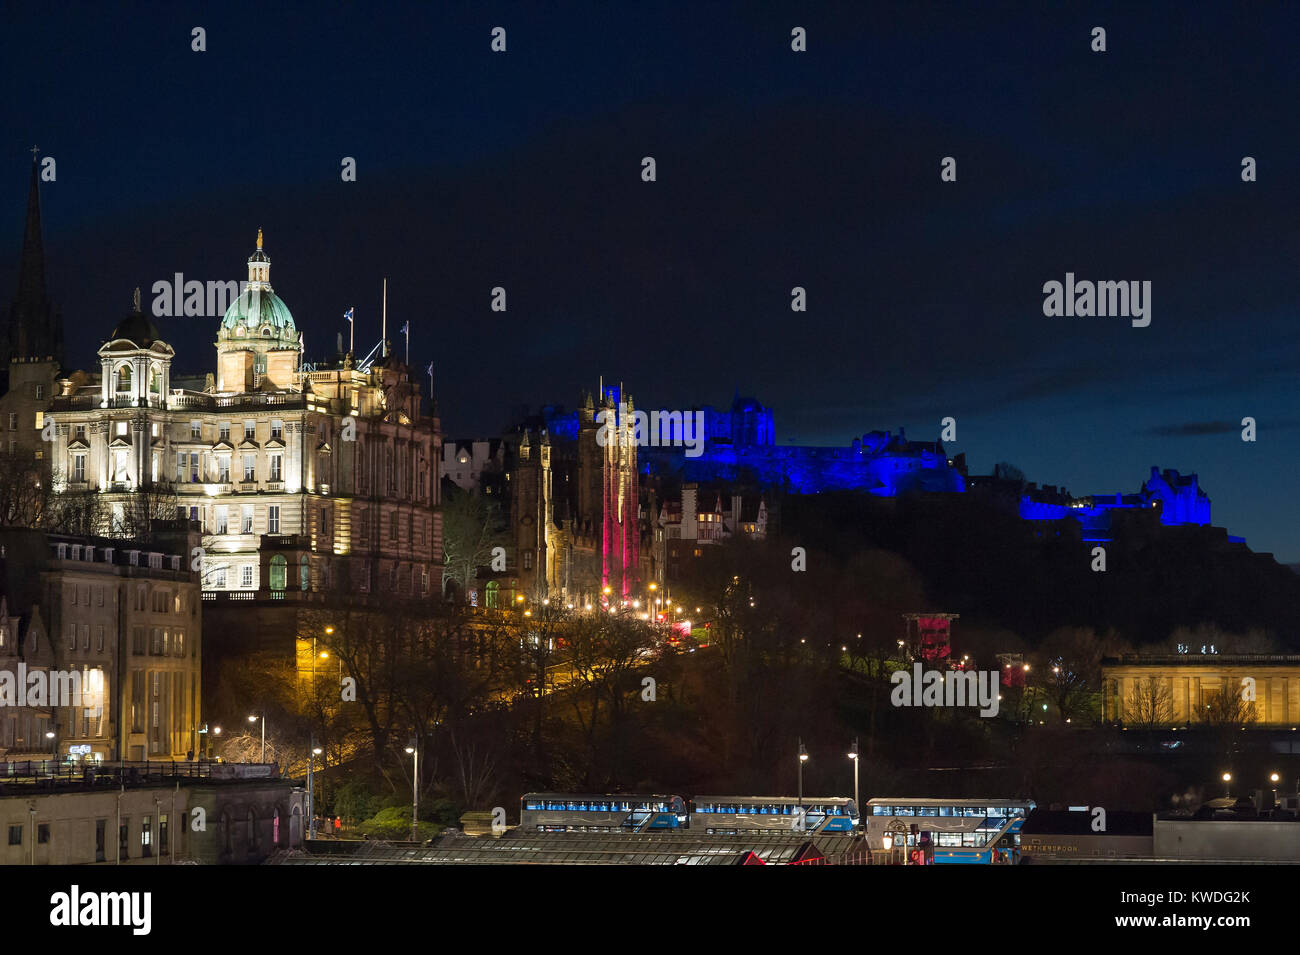 The Bank of Scotland HQ on the Mound and Edinburgh castle illuminated in blue during the new year celebrations. Stock Photo